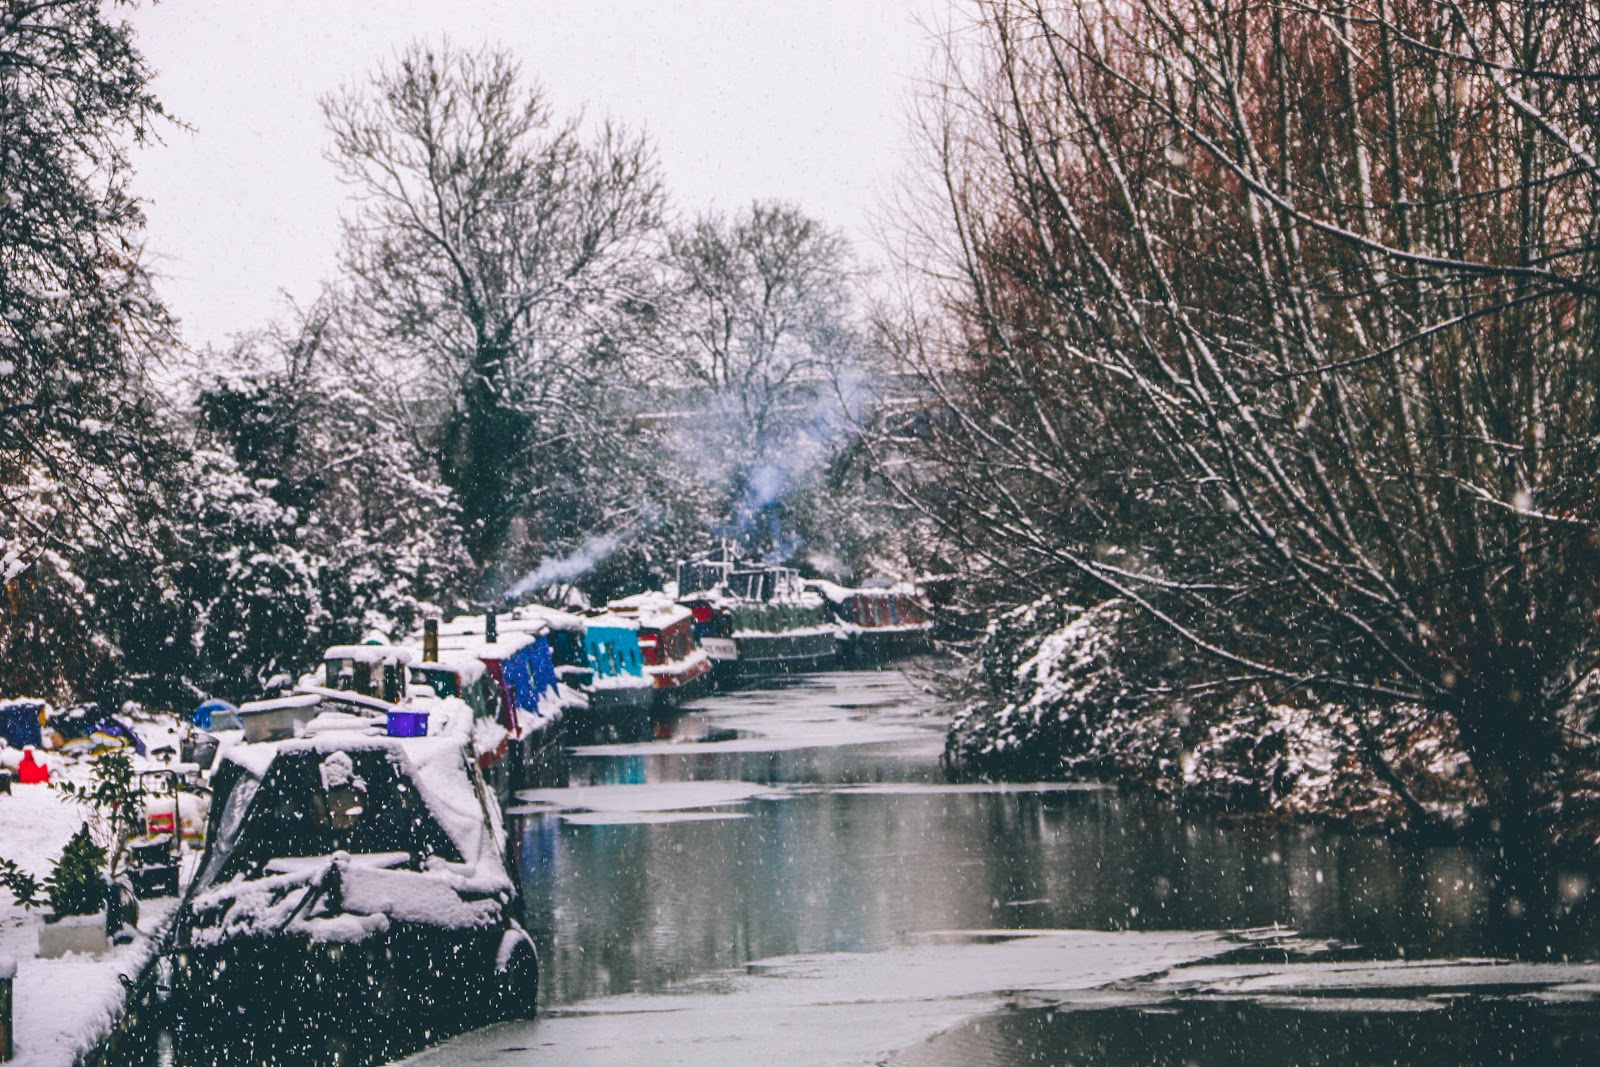 narrowboats covered in snow